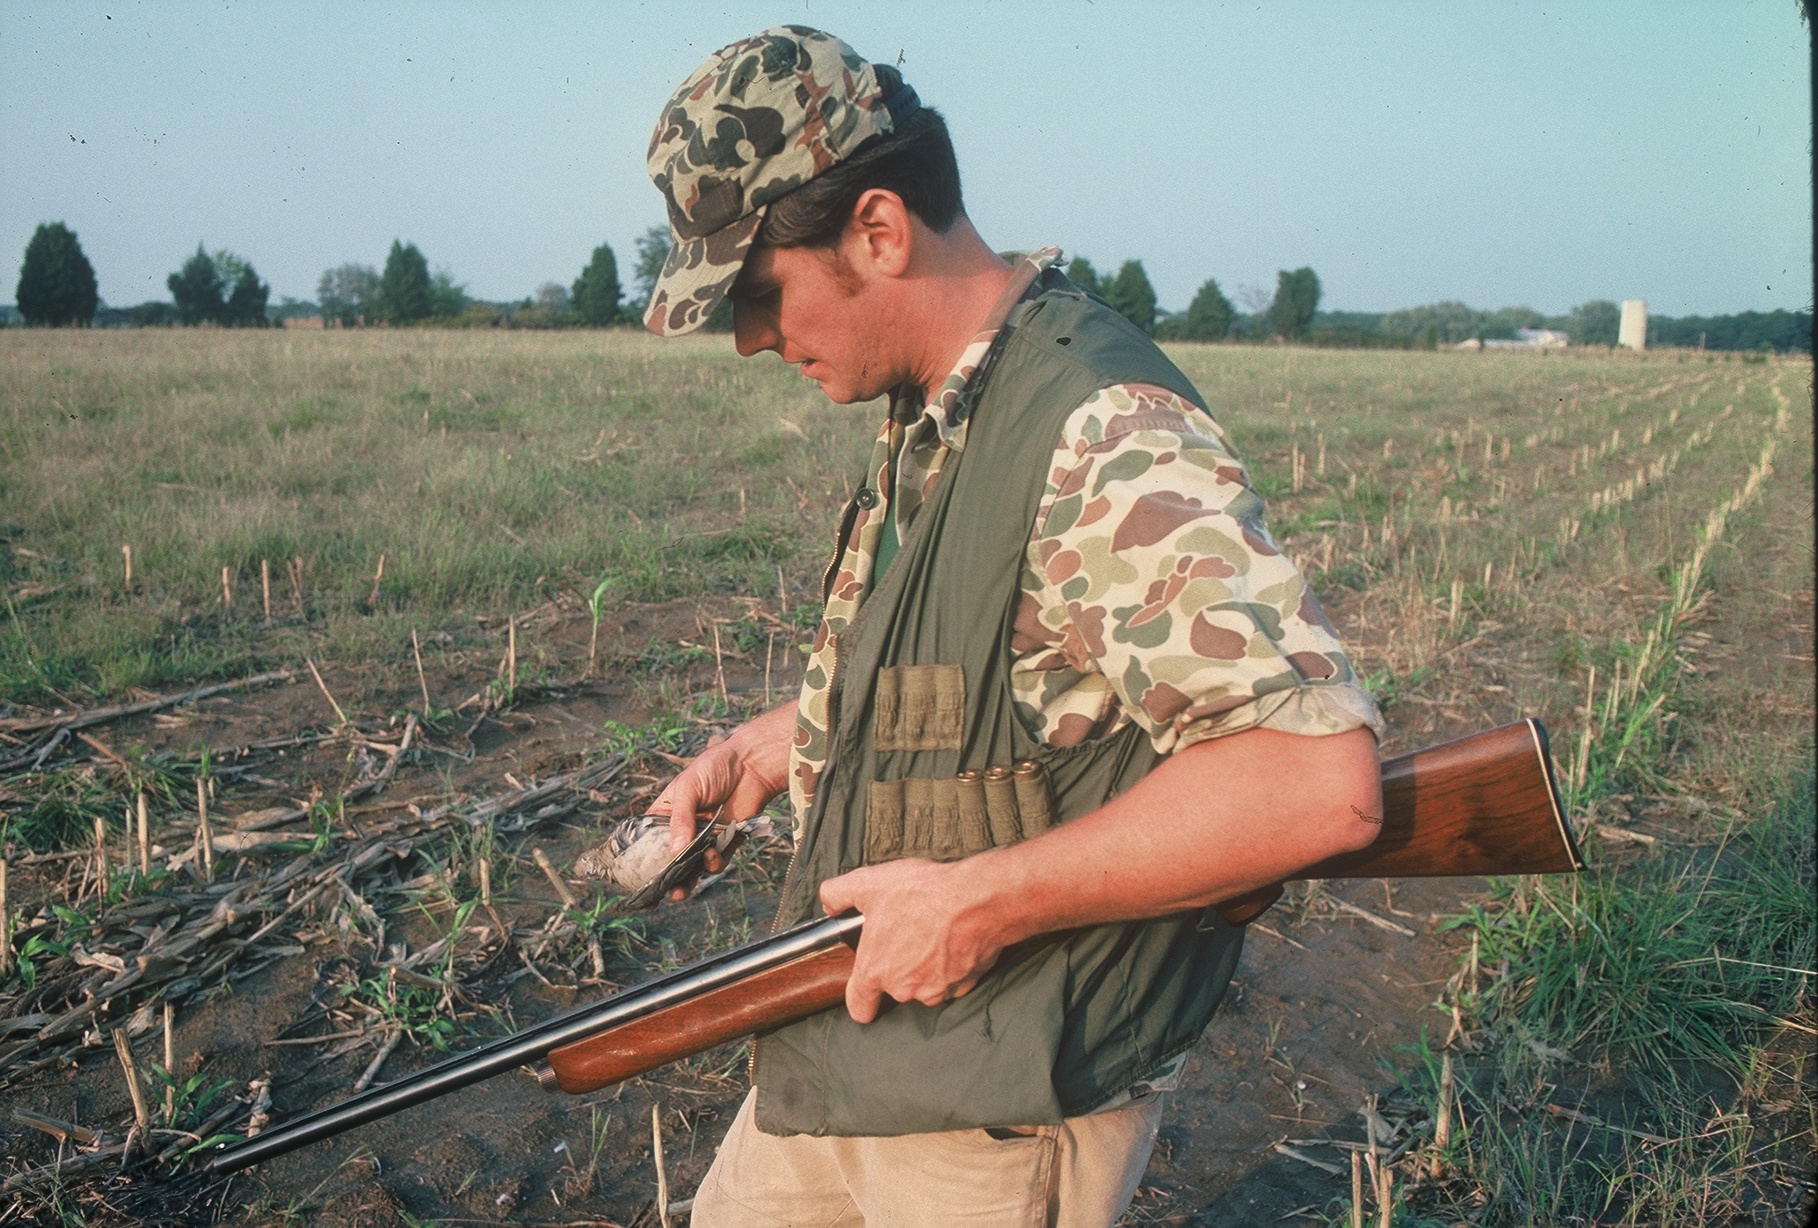 An image of a hunter in camouflage holding a dead dove and a gun